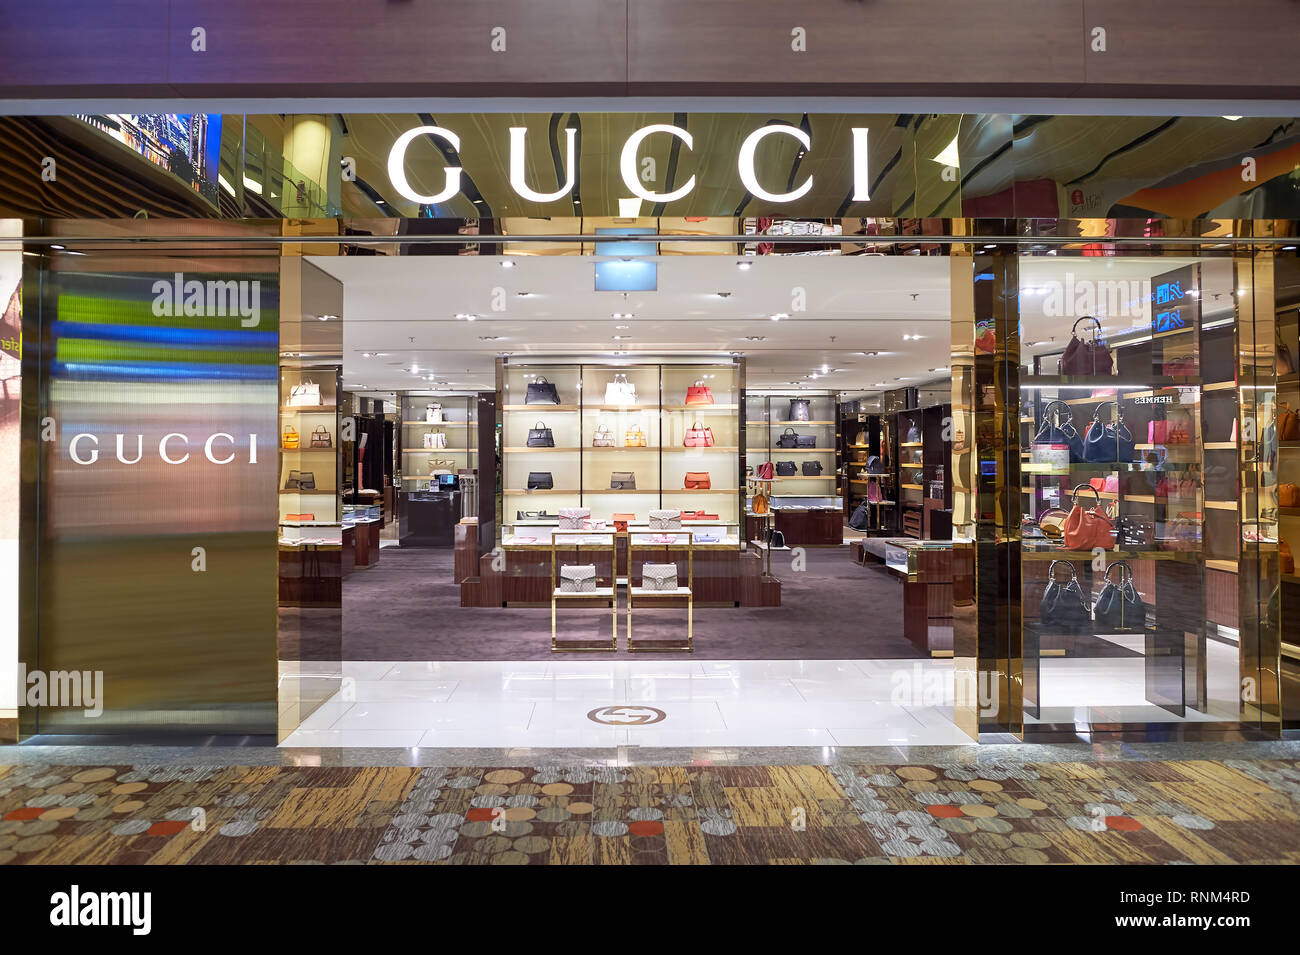 Gucci Singapore High Resolution Stock Photography and Images - Alamy